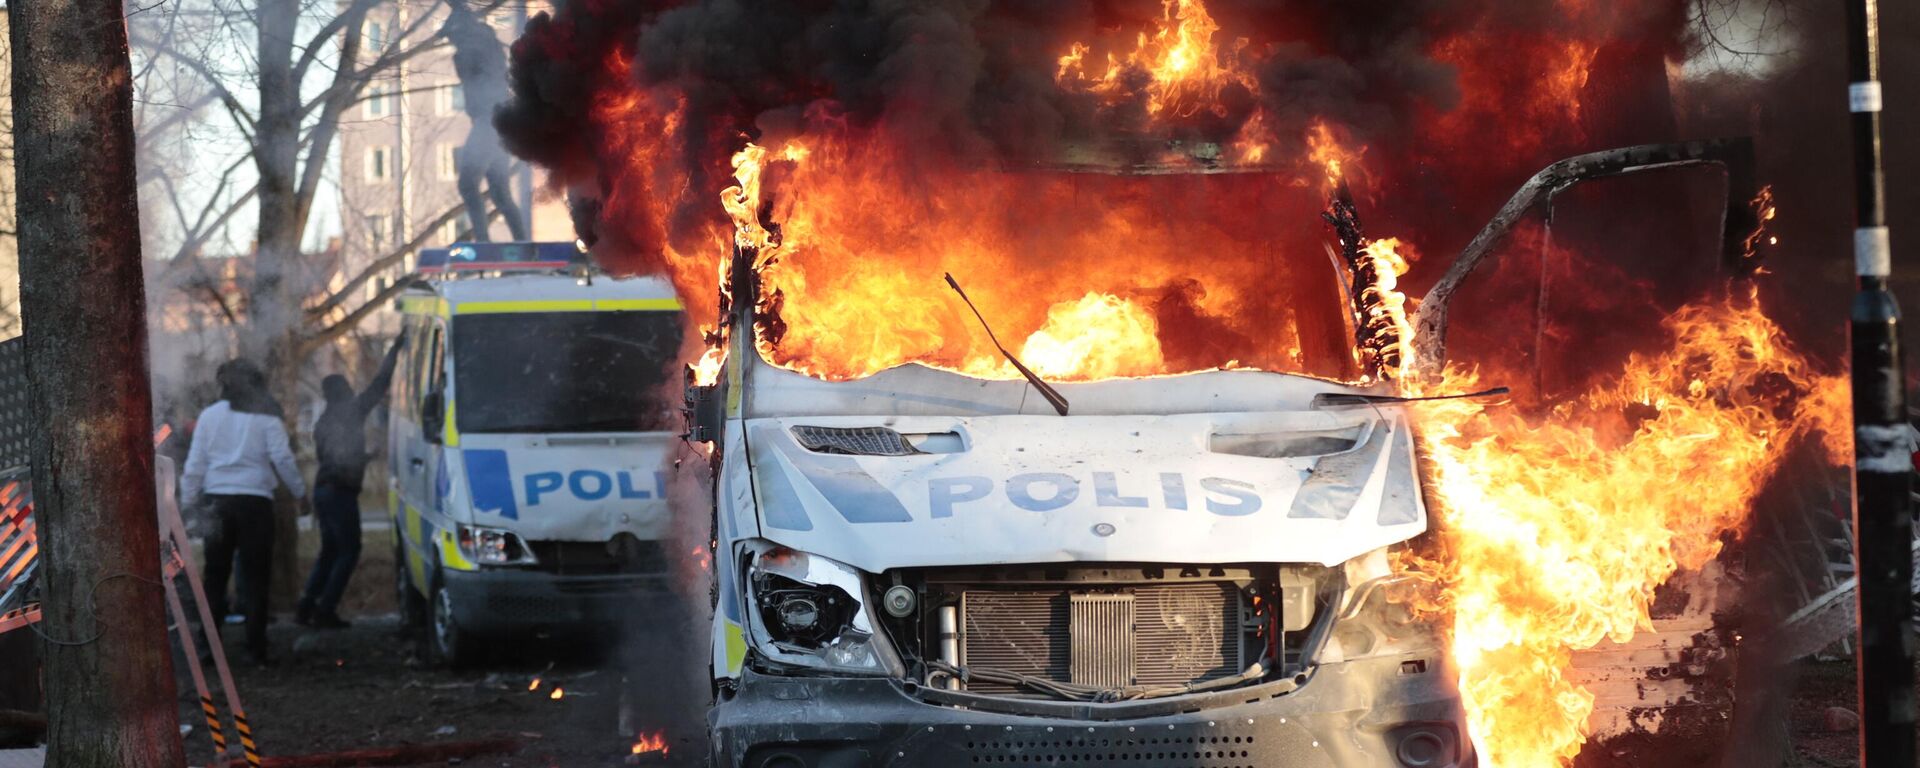 Police vans are on fire during a counter-protest in the park Sveaparken in Orebro, south-centre Sweden - Sputnik International, 1920, 22.04.2022